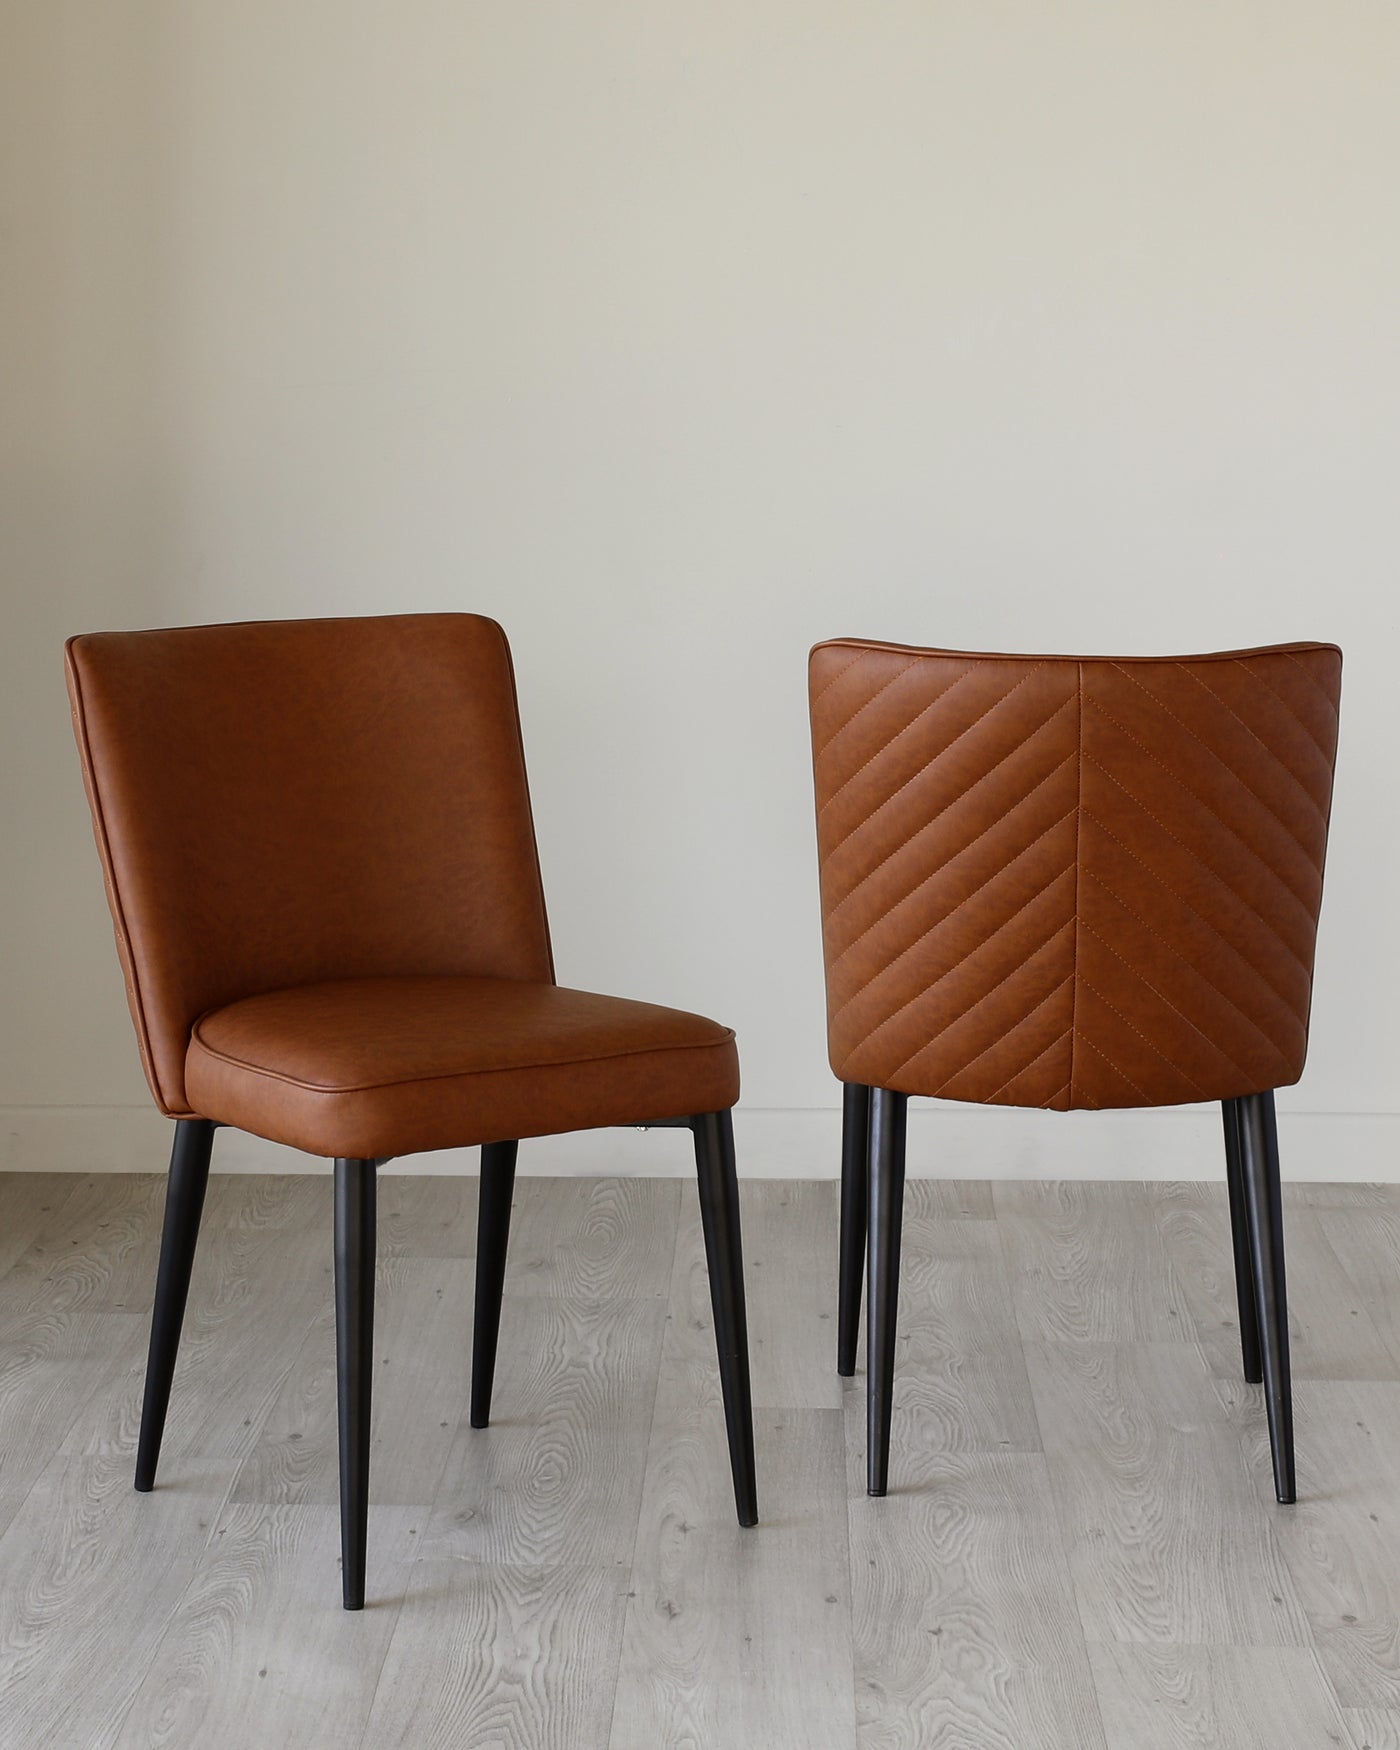 Two modern dining chairs with caramel brown faux leather upholstery and black metal legs, one chair showing the front profile with a smooth finish, and the other chair turned around displaying a diamond quilted backrest design.